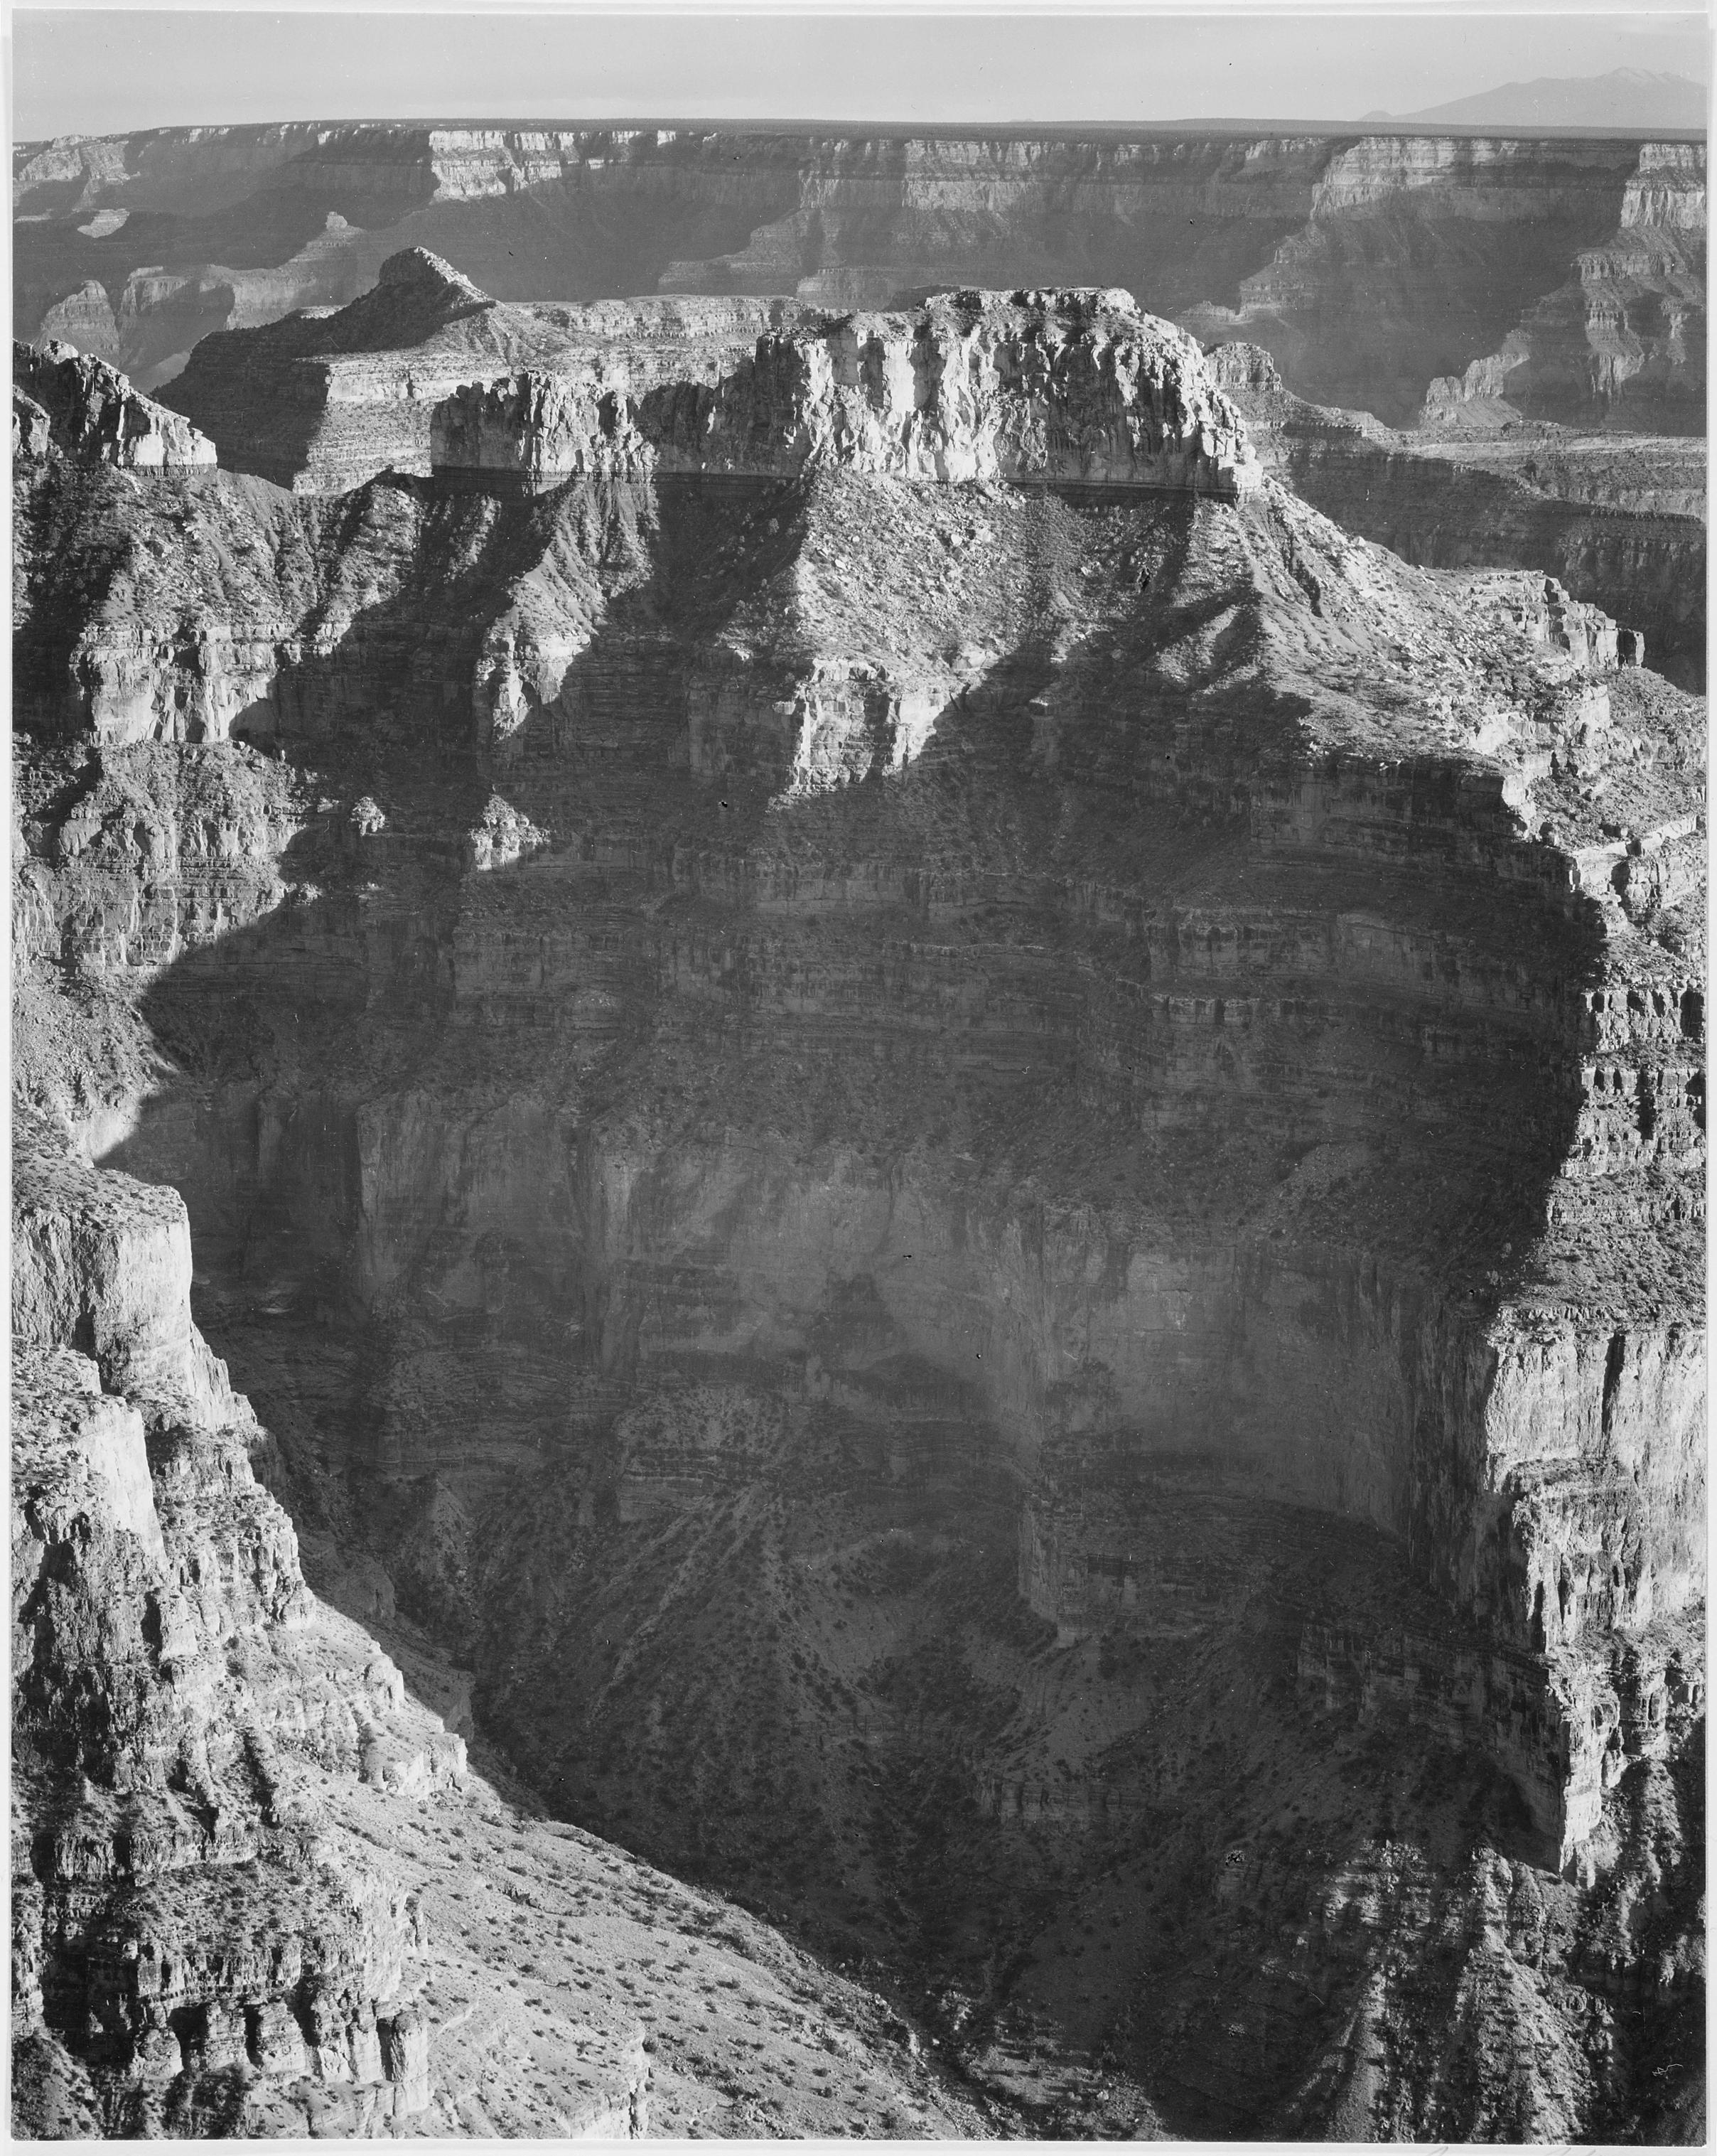 Ansel Adams - National Archives 79-AA-F25